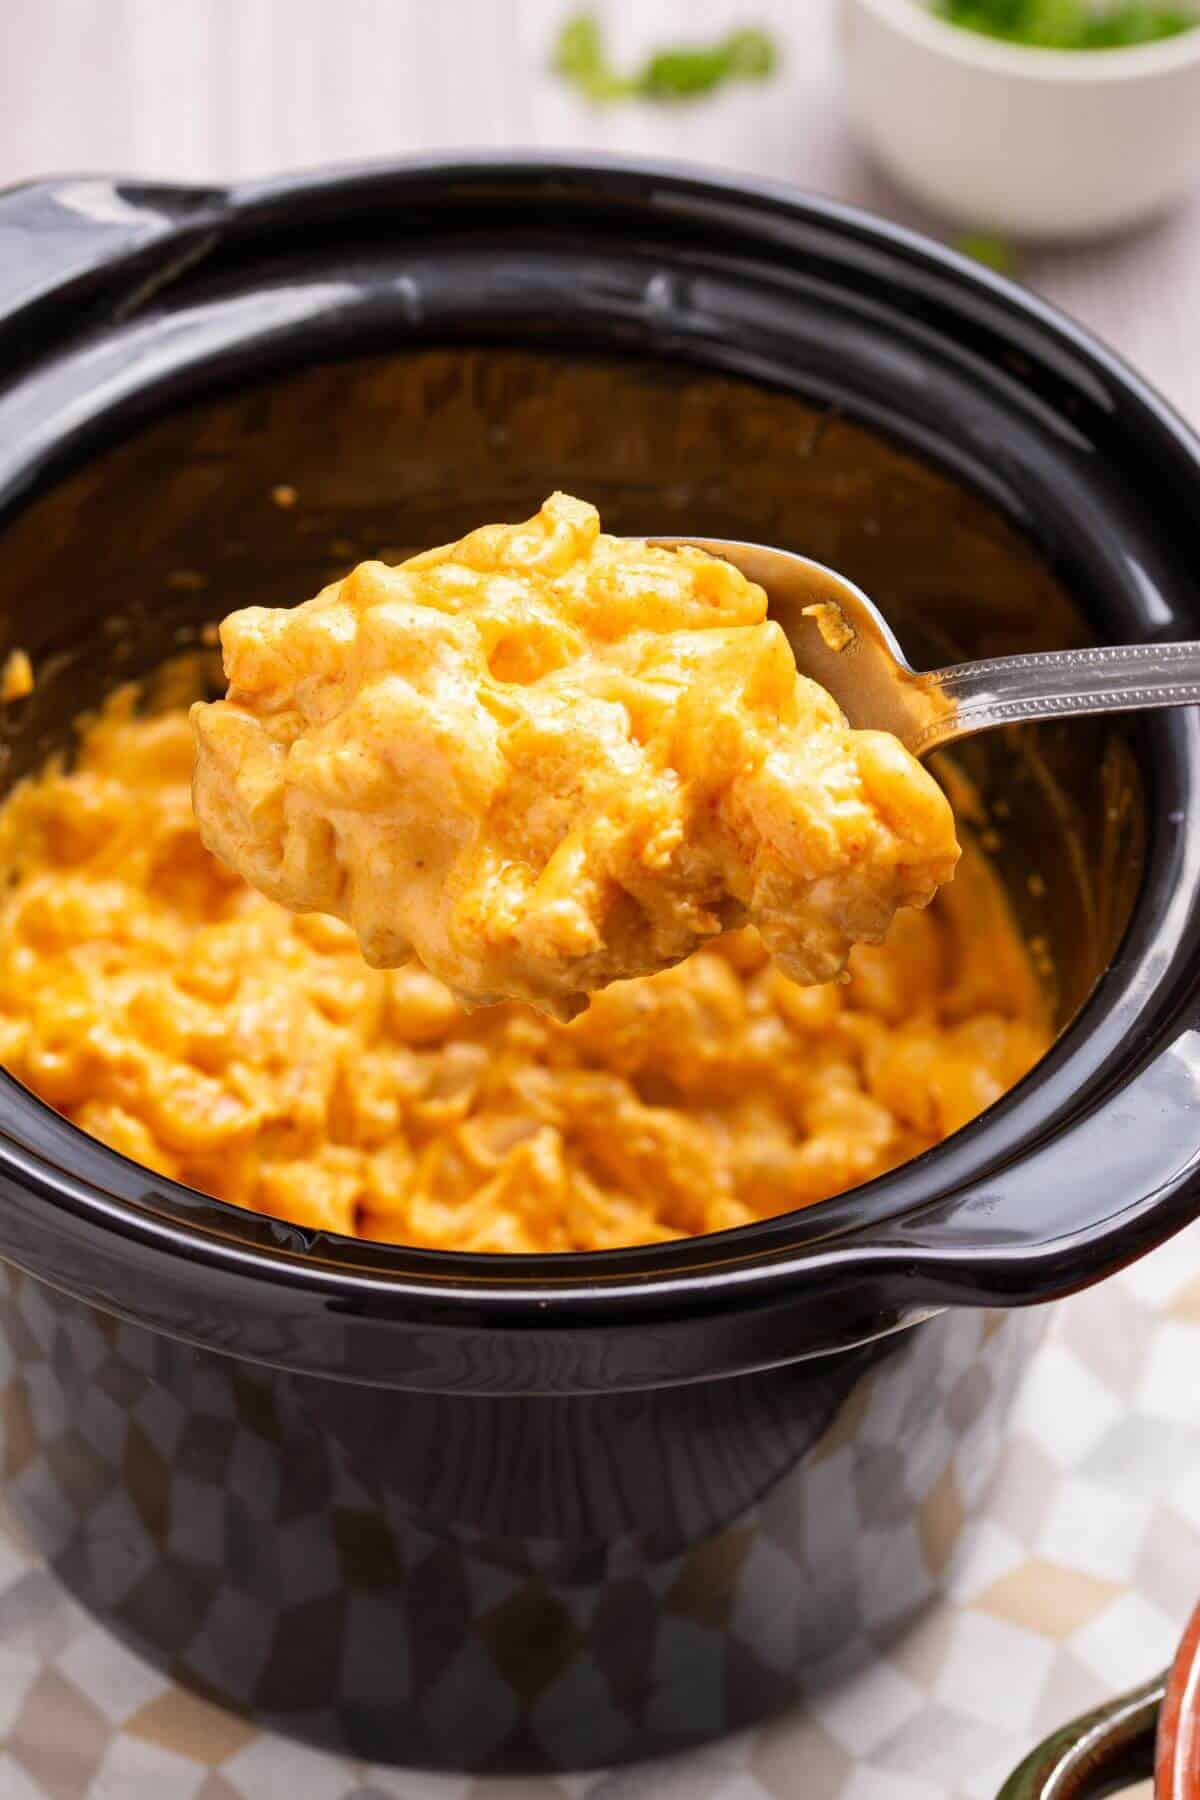 Macaroni and cheese in a crock pot.